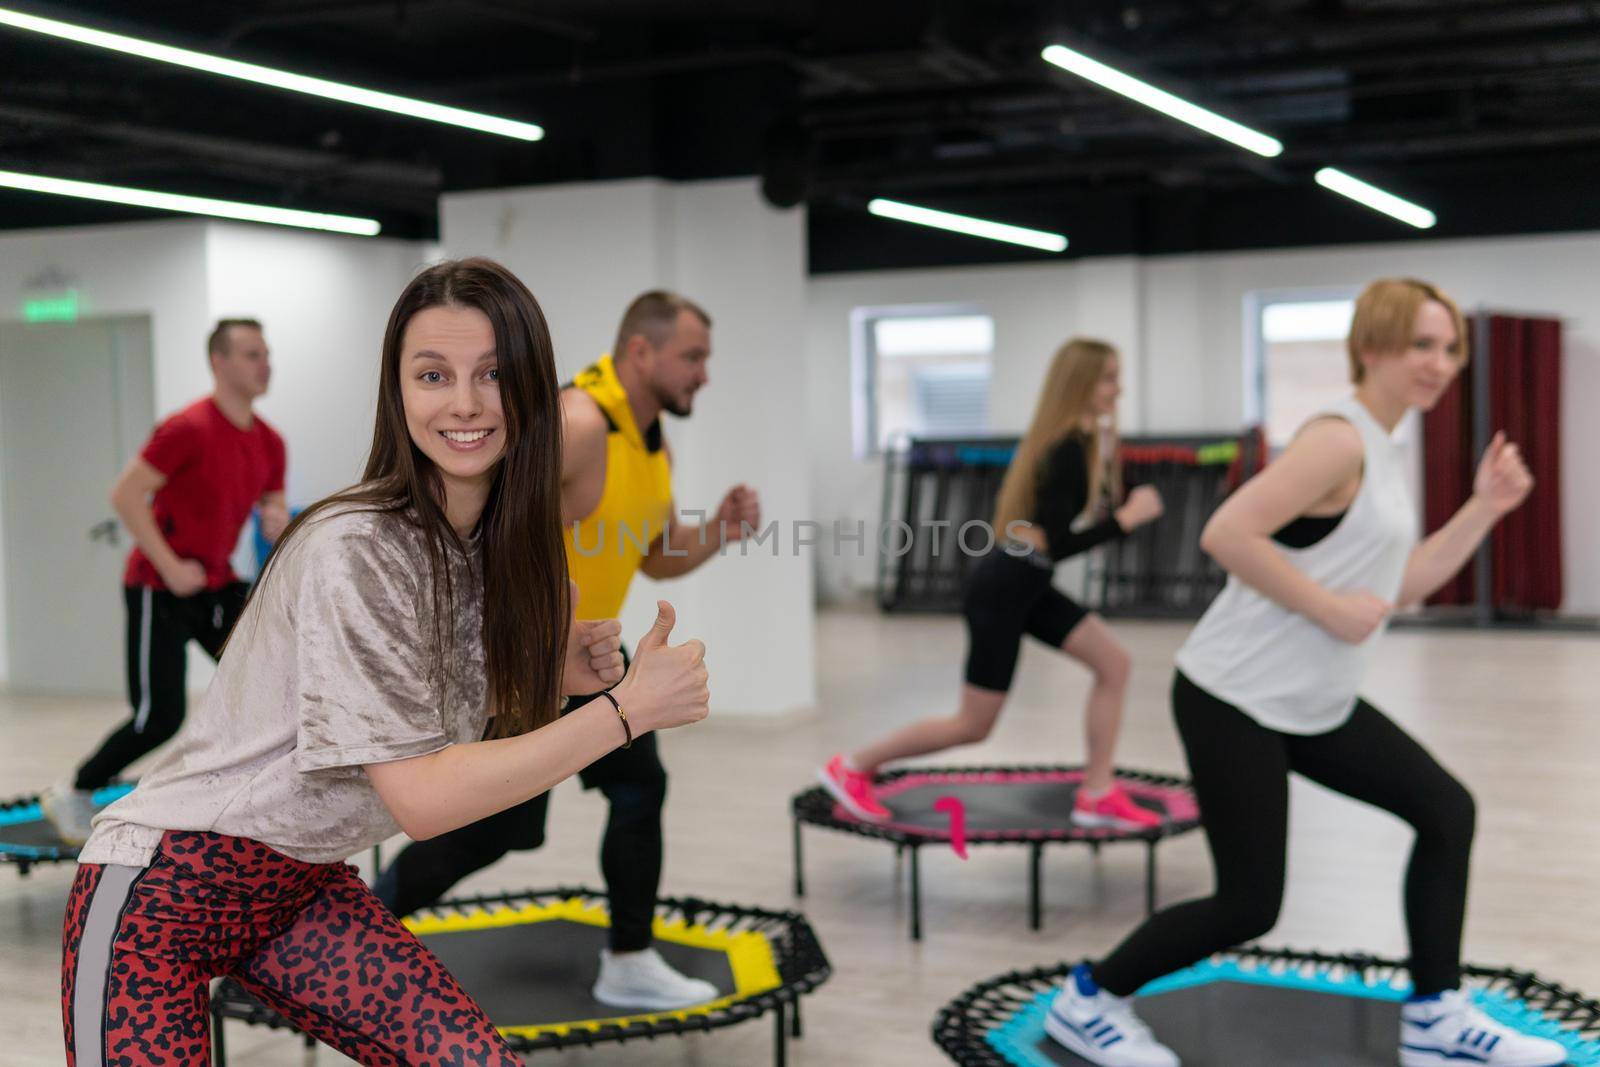 Women's and men's group on a sports trampoline, fitness training, healthy life - a concept trampoline group batut girl men, from fit activity for sporty and sport shaping, wellness happiness. Studio beauty loss, aerobic by 89167702191